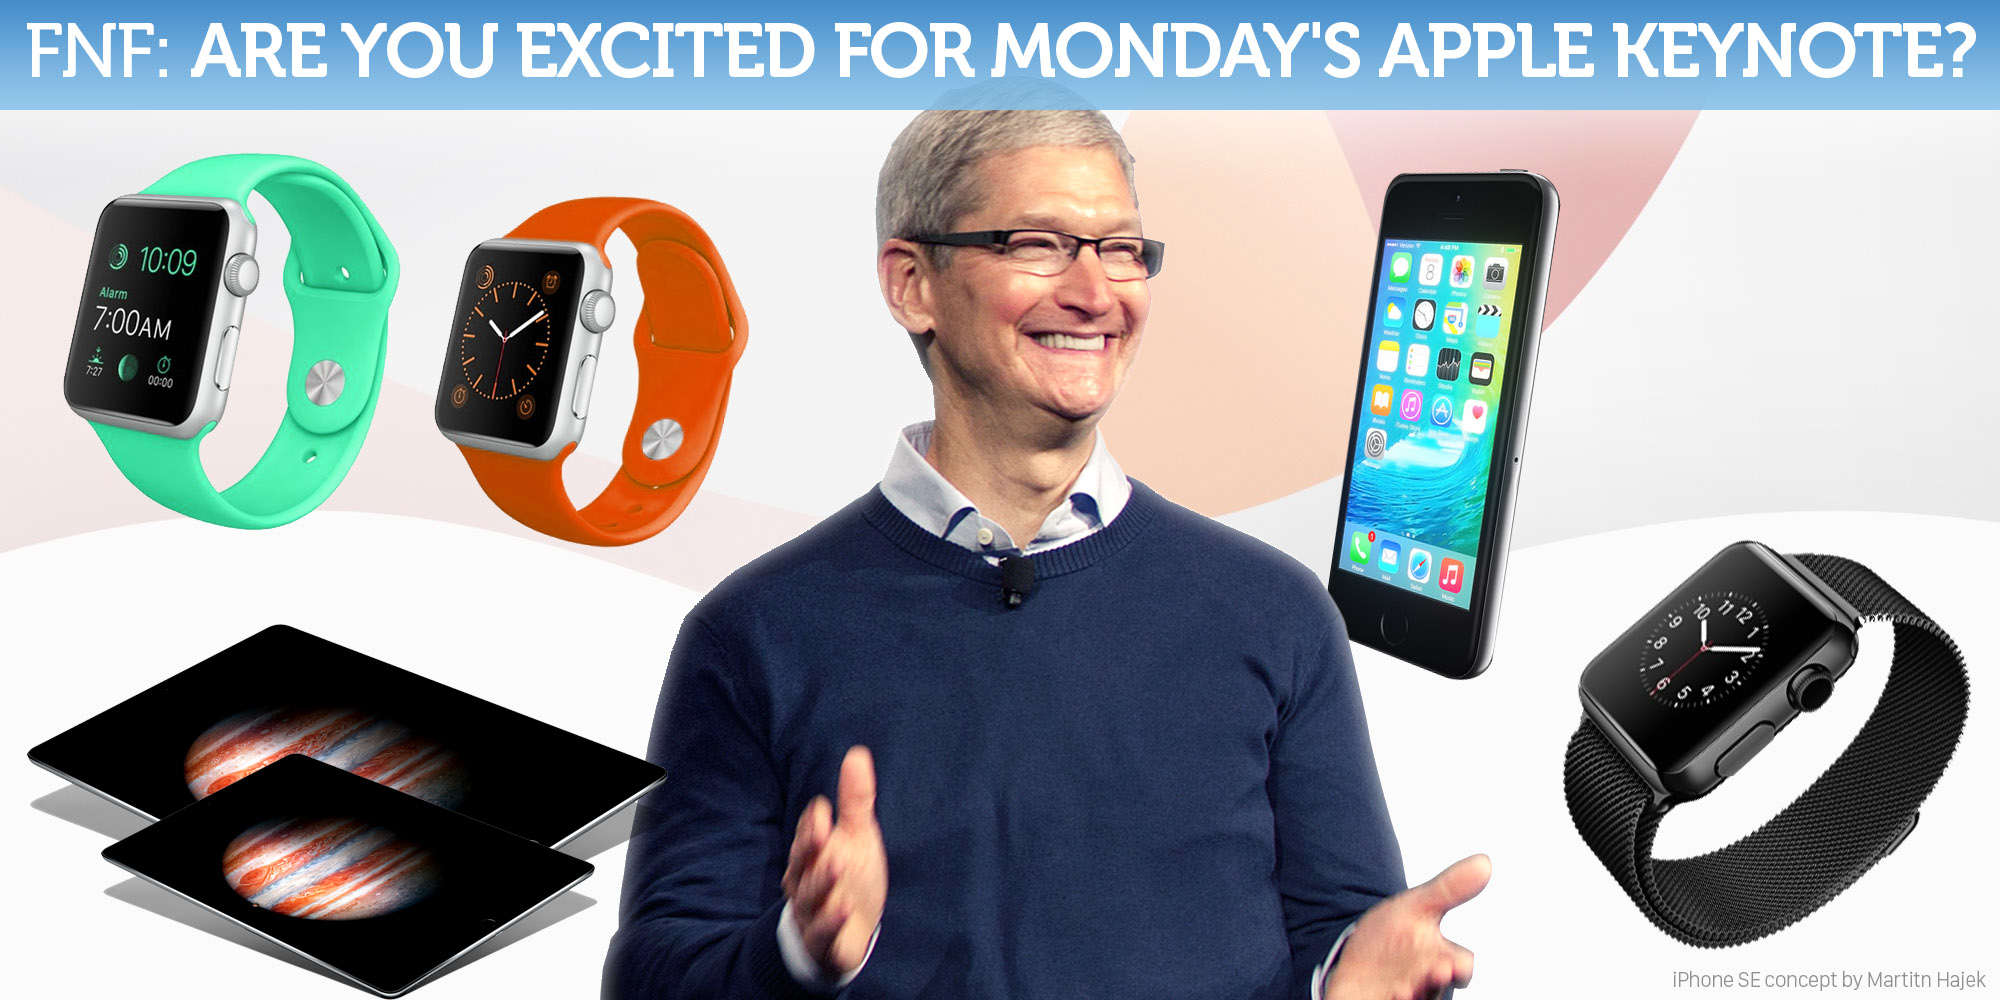 Our resident Apple fanboy can't wait!